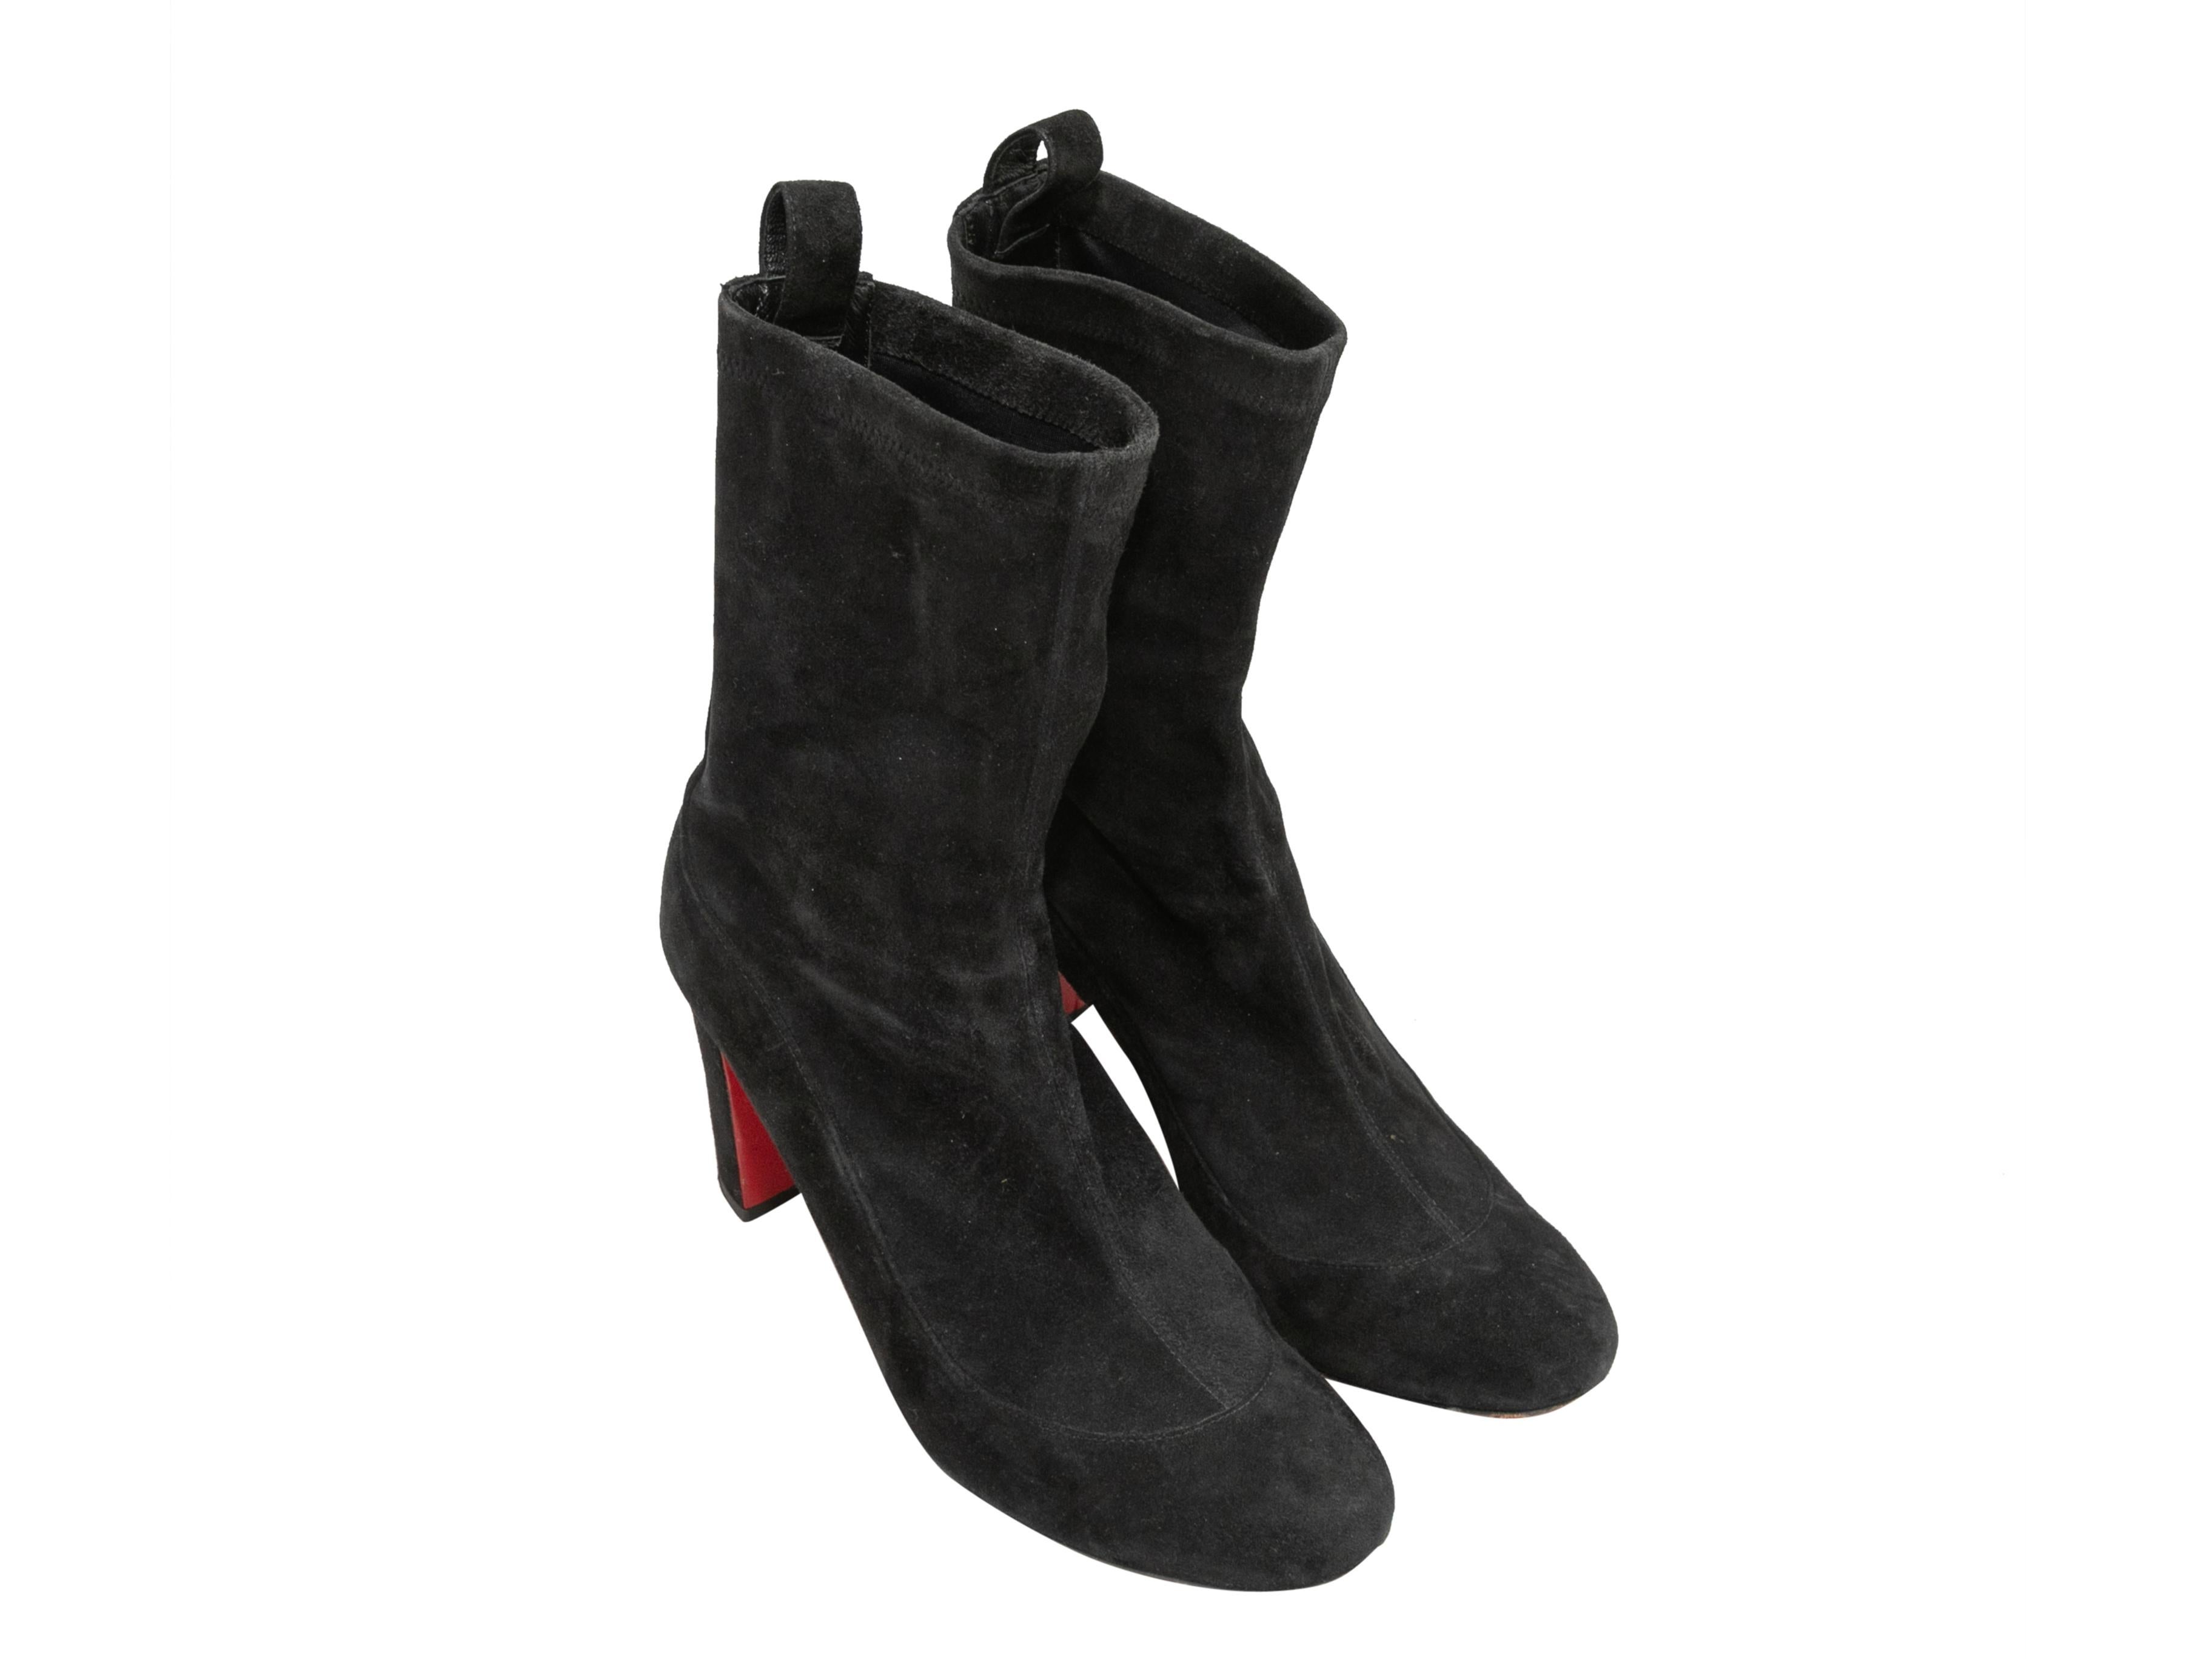 Black mid-calf suede heeled boots by Christian Louboutin. Block heels. 7